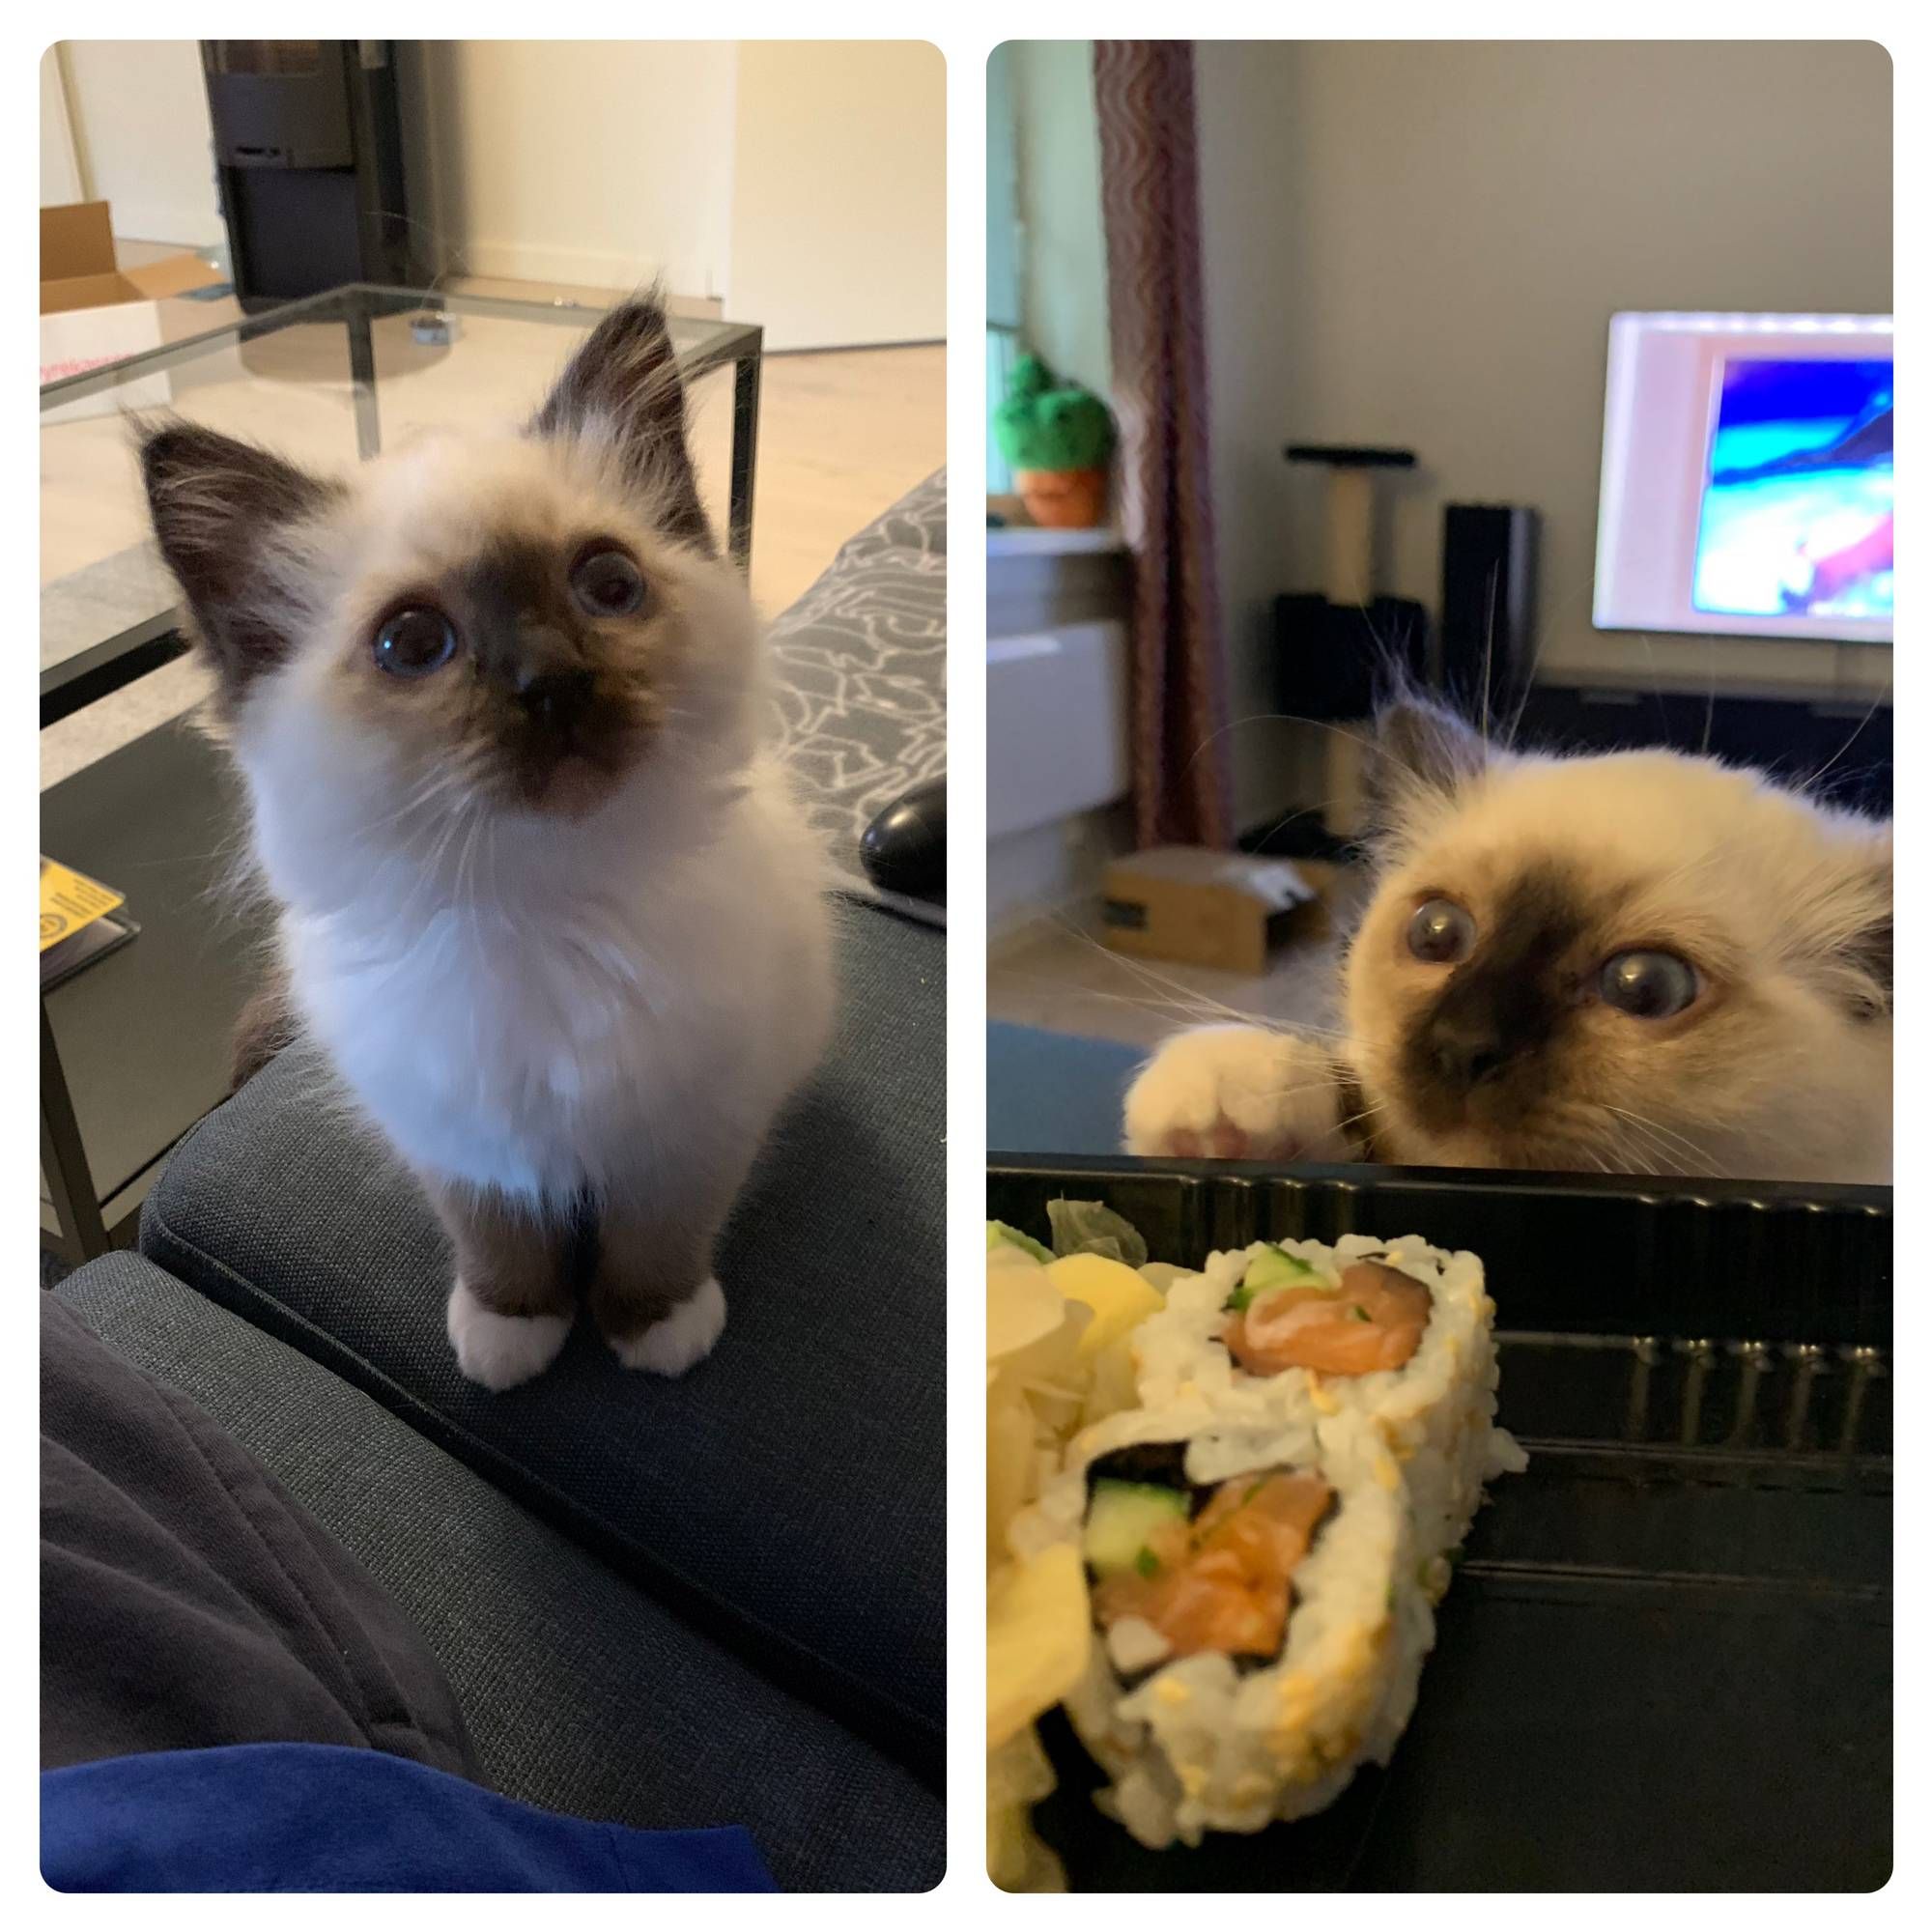 My kitten before and after sushi